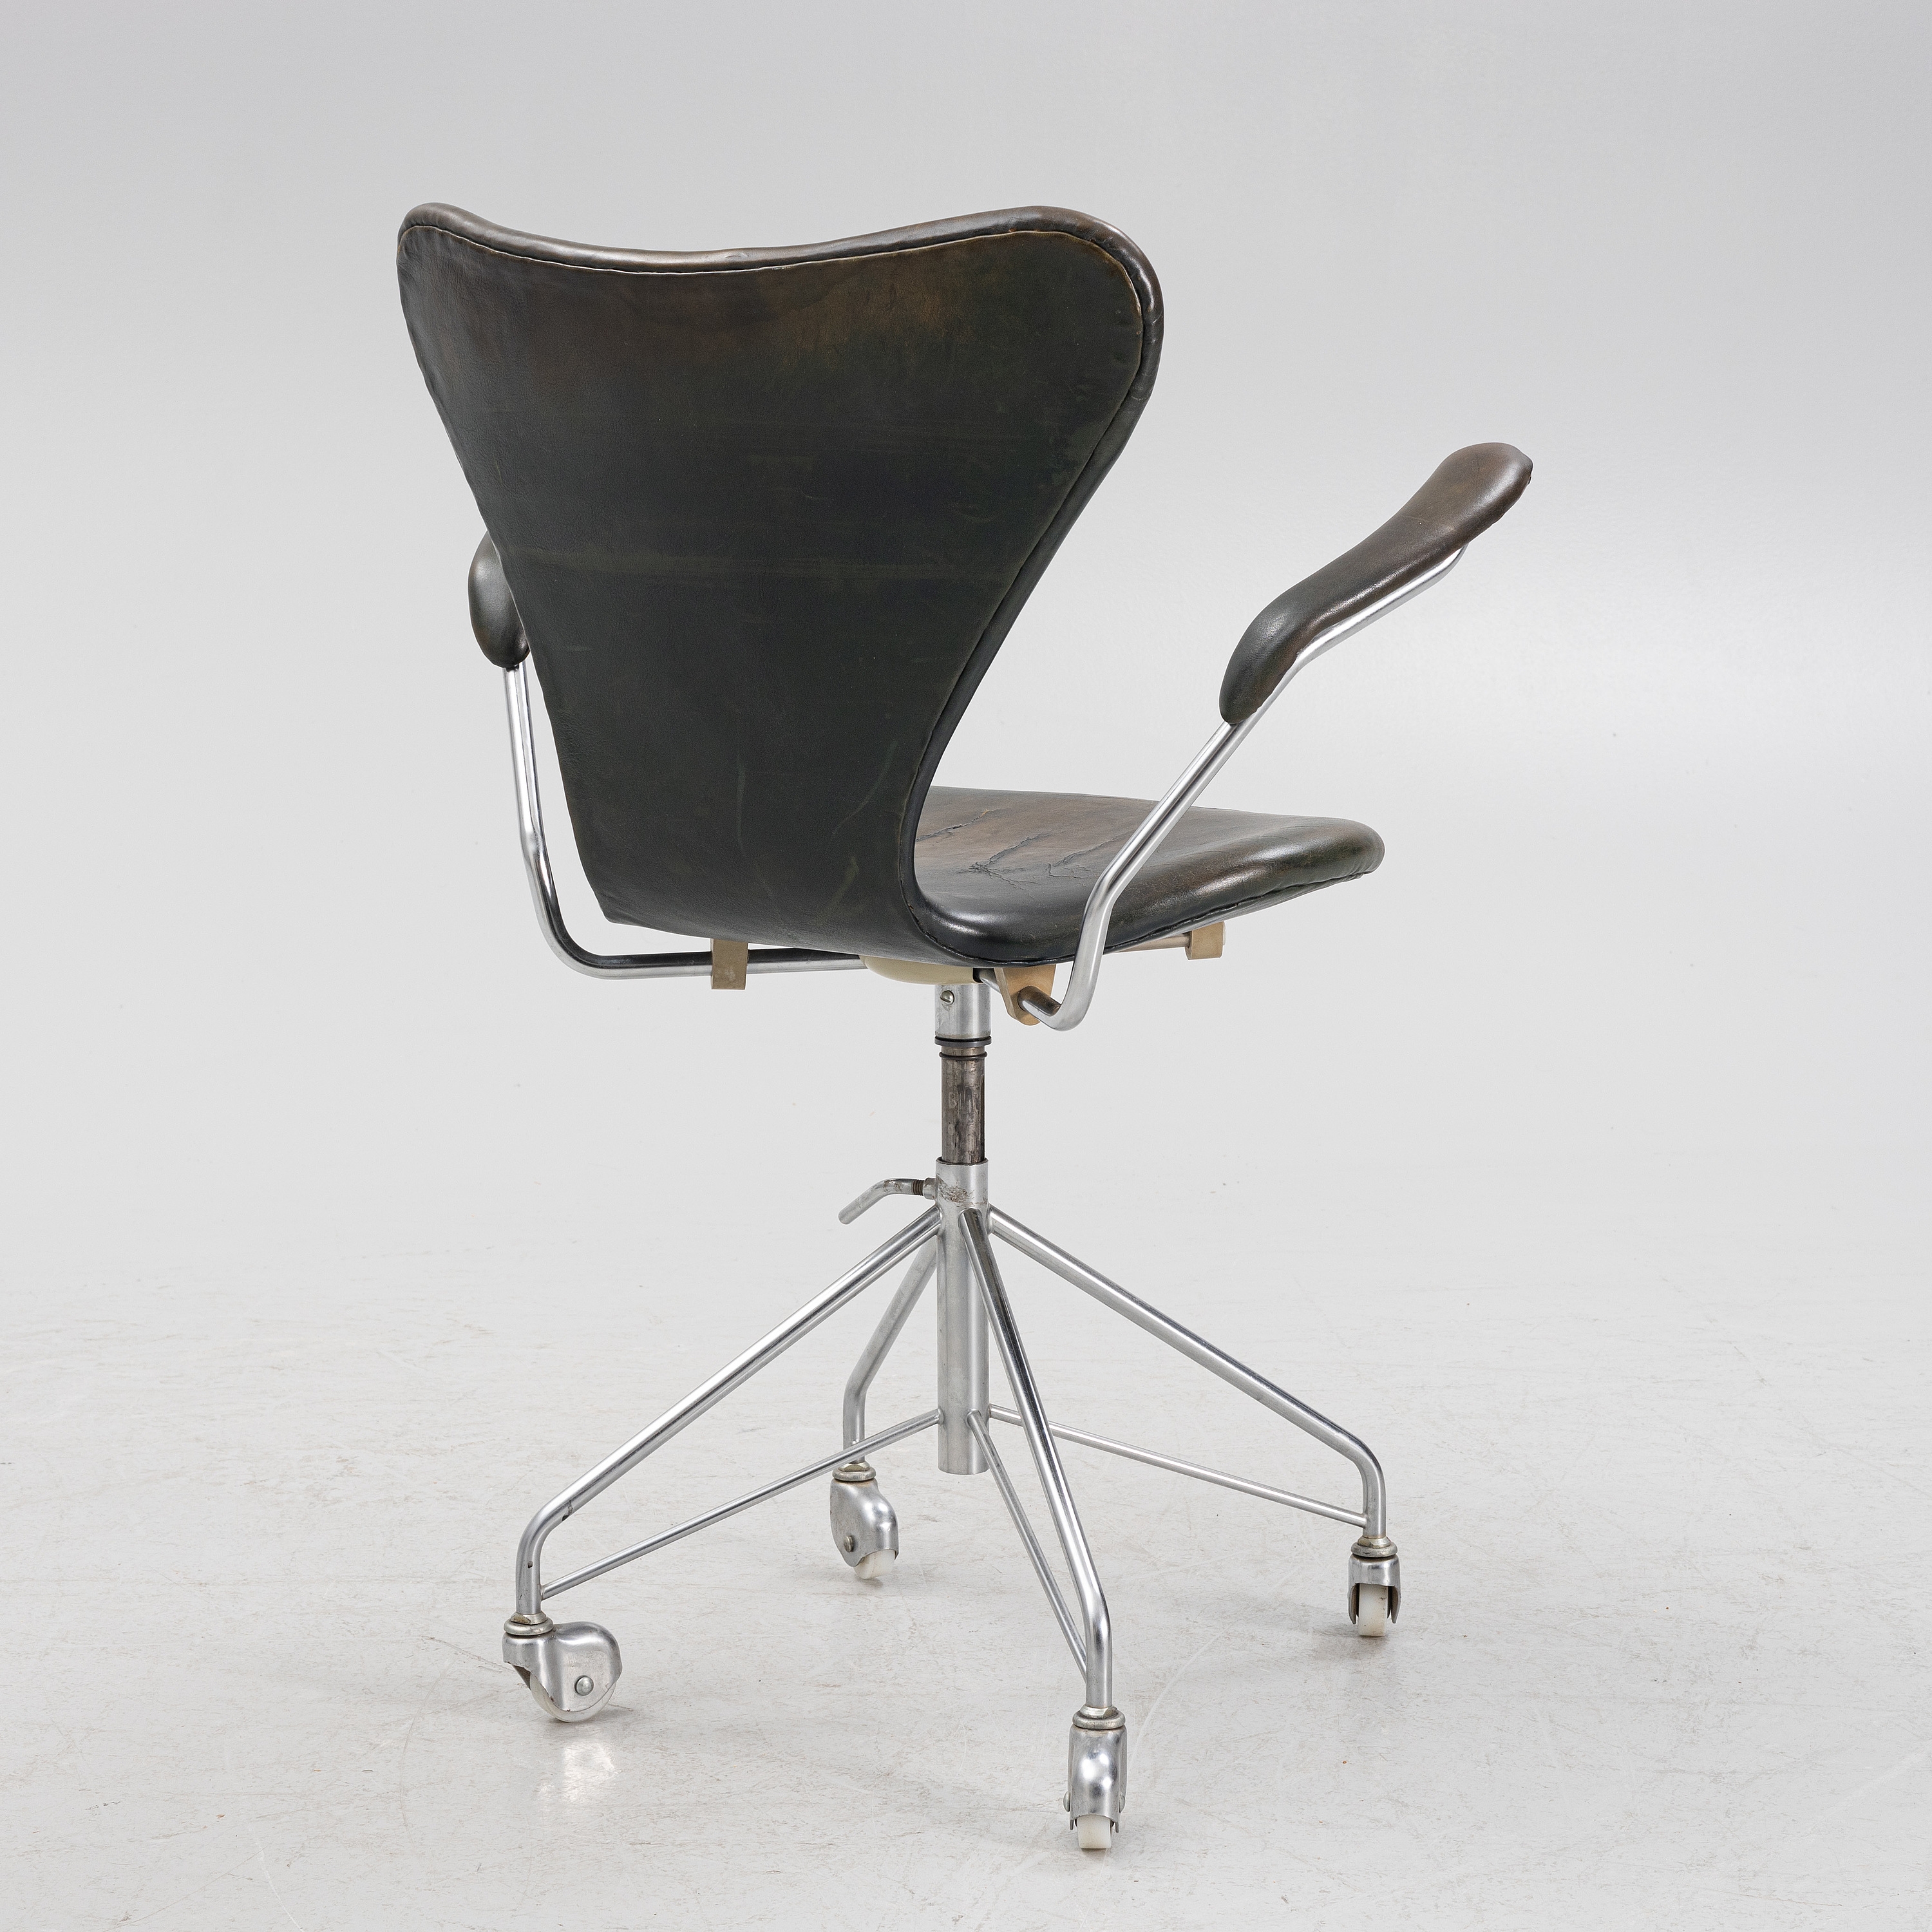 Artwork by Arne Jacobsen, a 'Sjuan' swivel chair, Fritz Hansen, Denmark 1970, Made of Chrome plated metal base on four wheels, upholstered seat and back with dark green/black leather